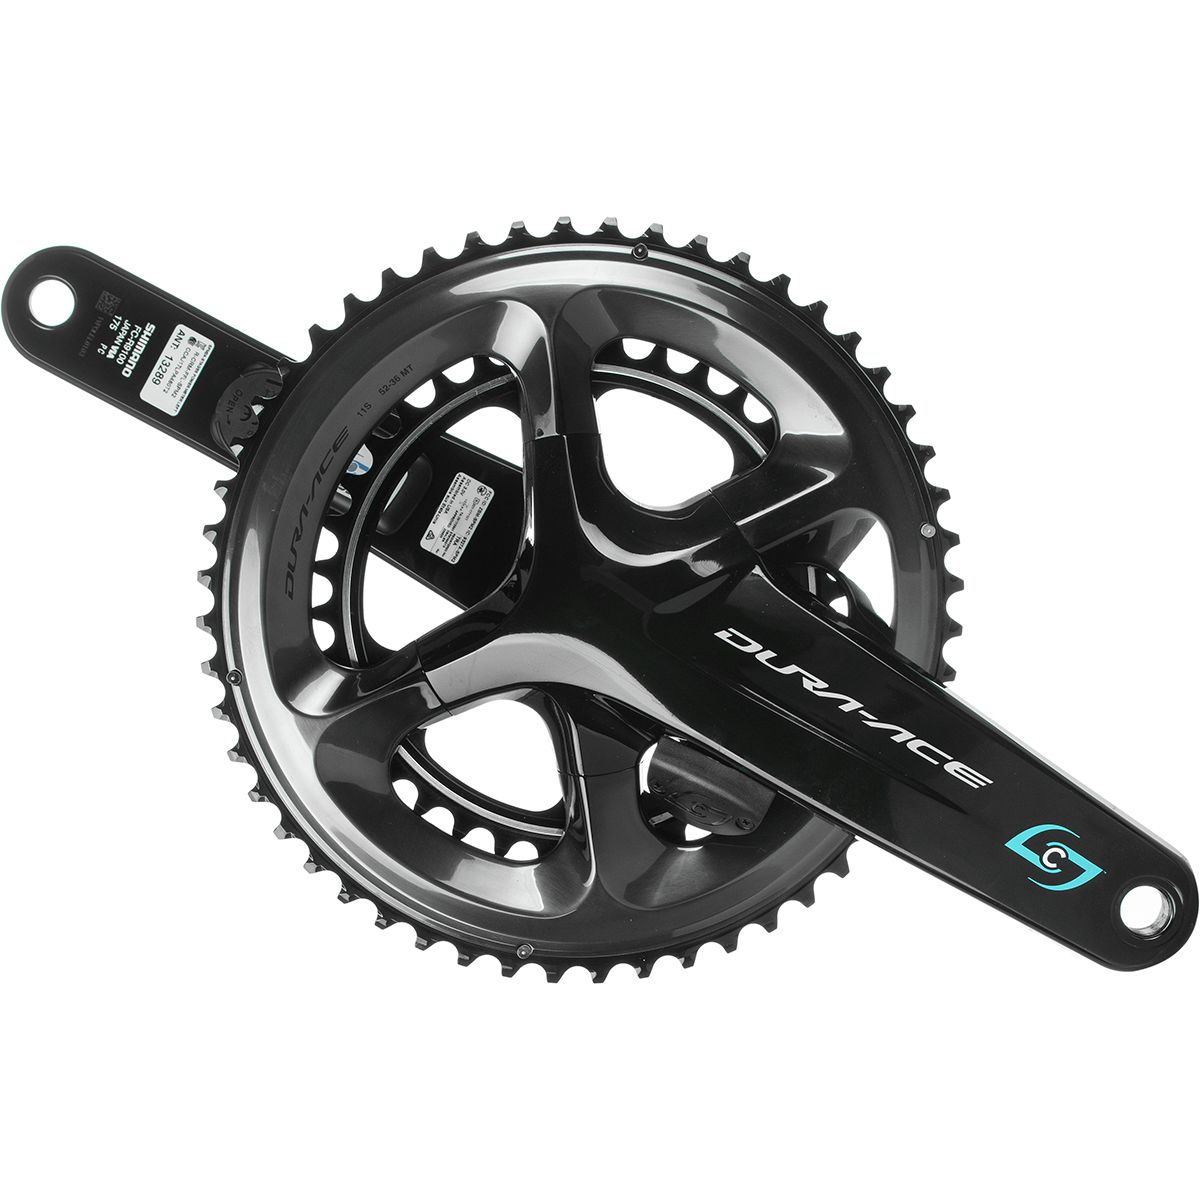 Stages Cycling Shimano Dura-Ace R9100 Gen 3 Dual-Sided Power Meter Crankset